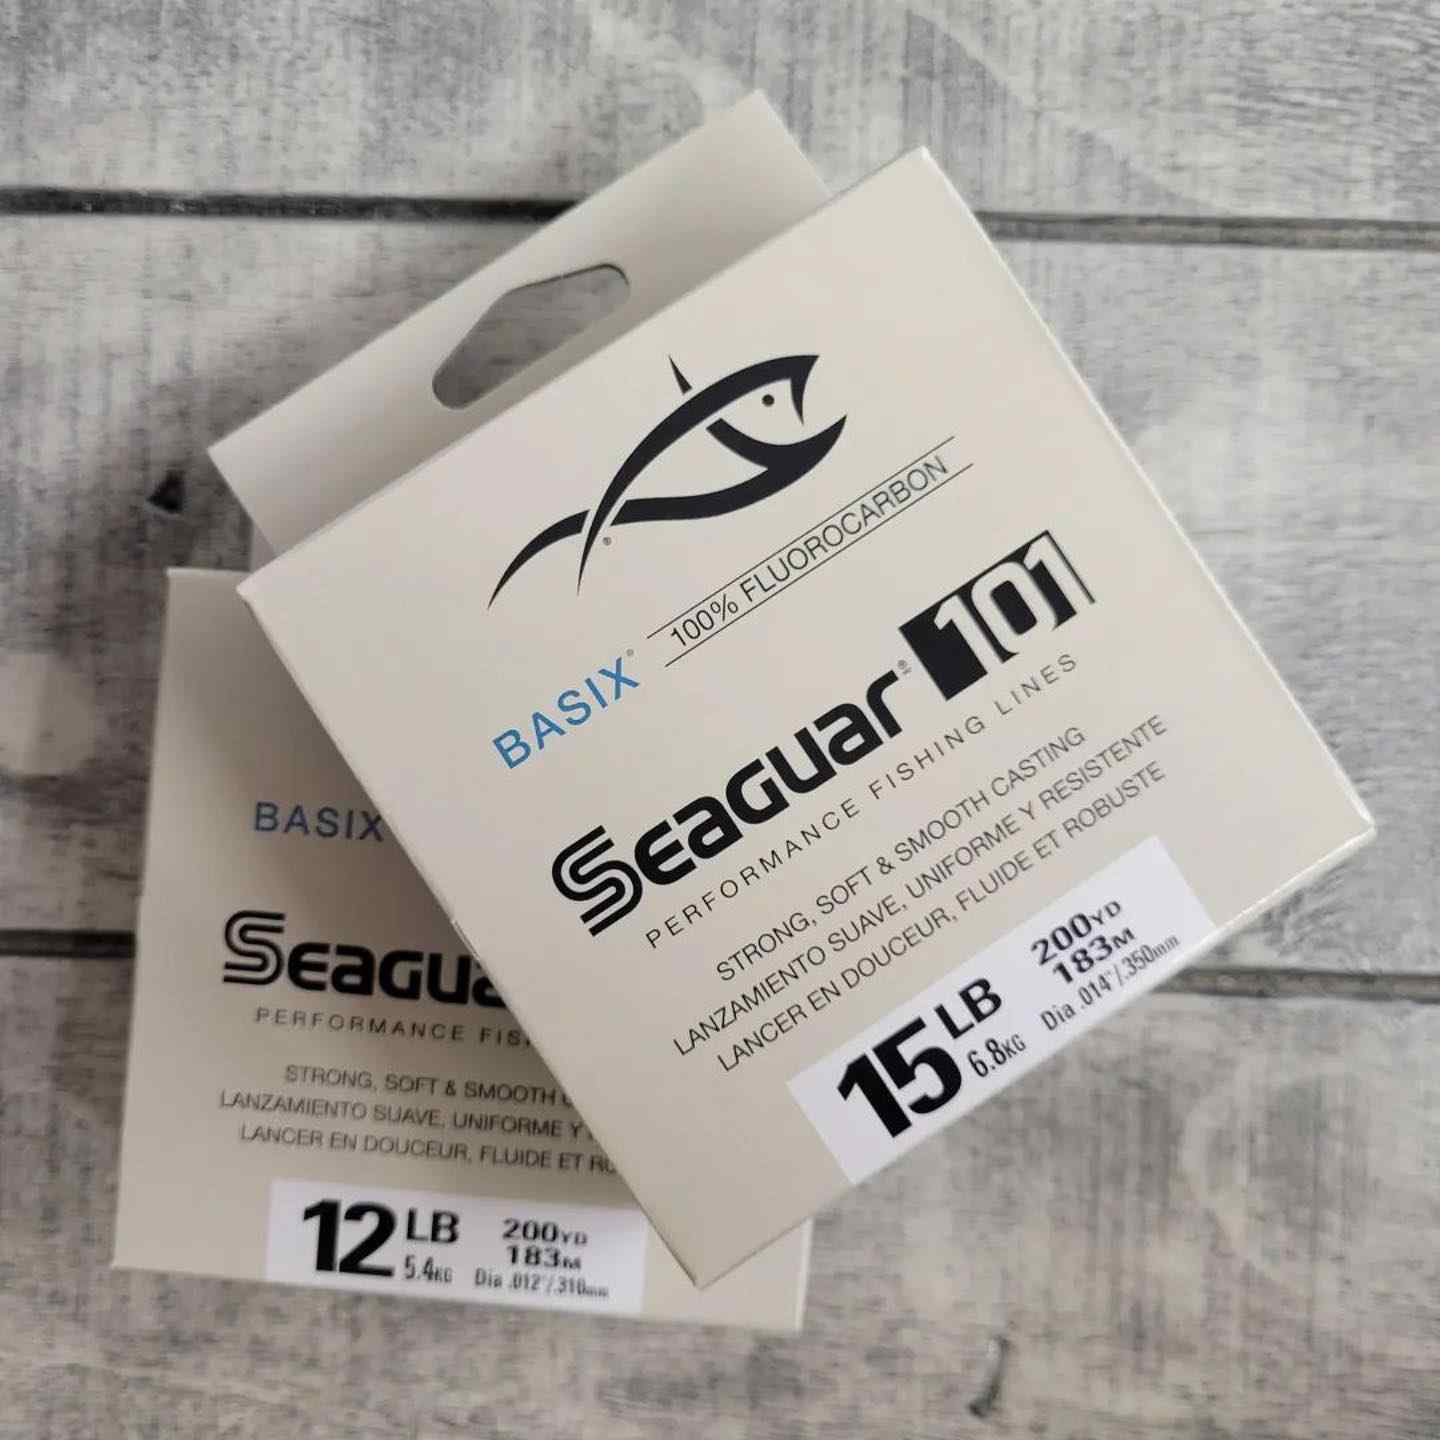 Seaguar BasiX - Have you tried it lately? - Fishing Rods, Reels